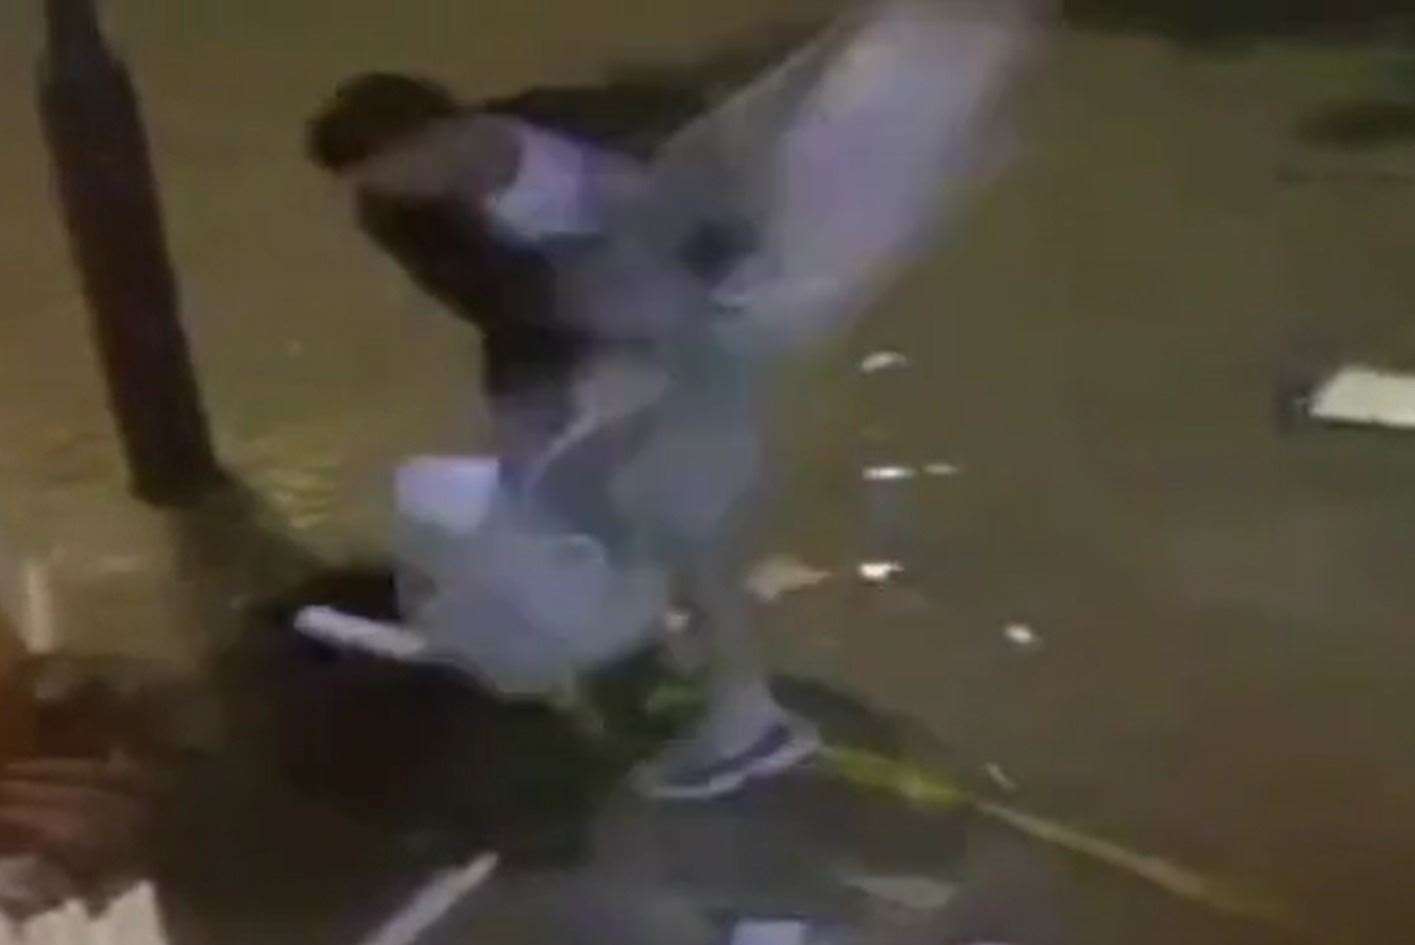 Footage shows man hurling rubbish across high street outside pawnbrokers in Ramsgate. Picture: Pawn It